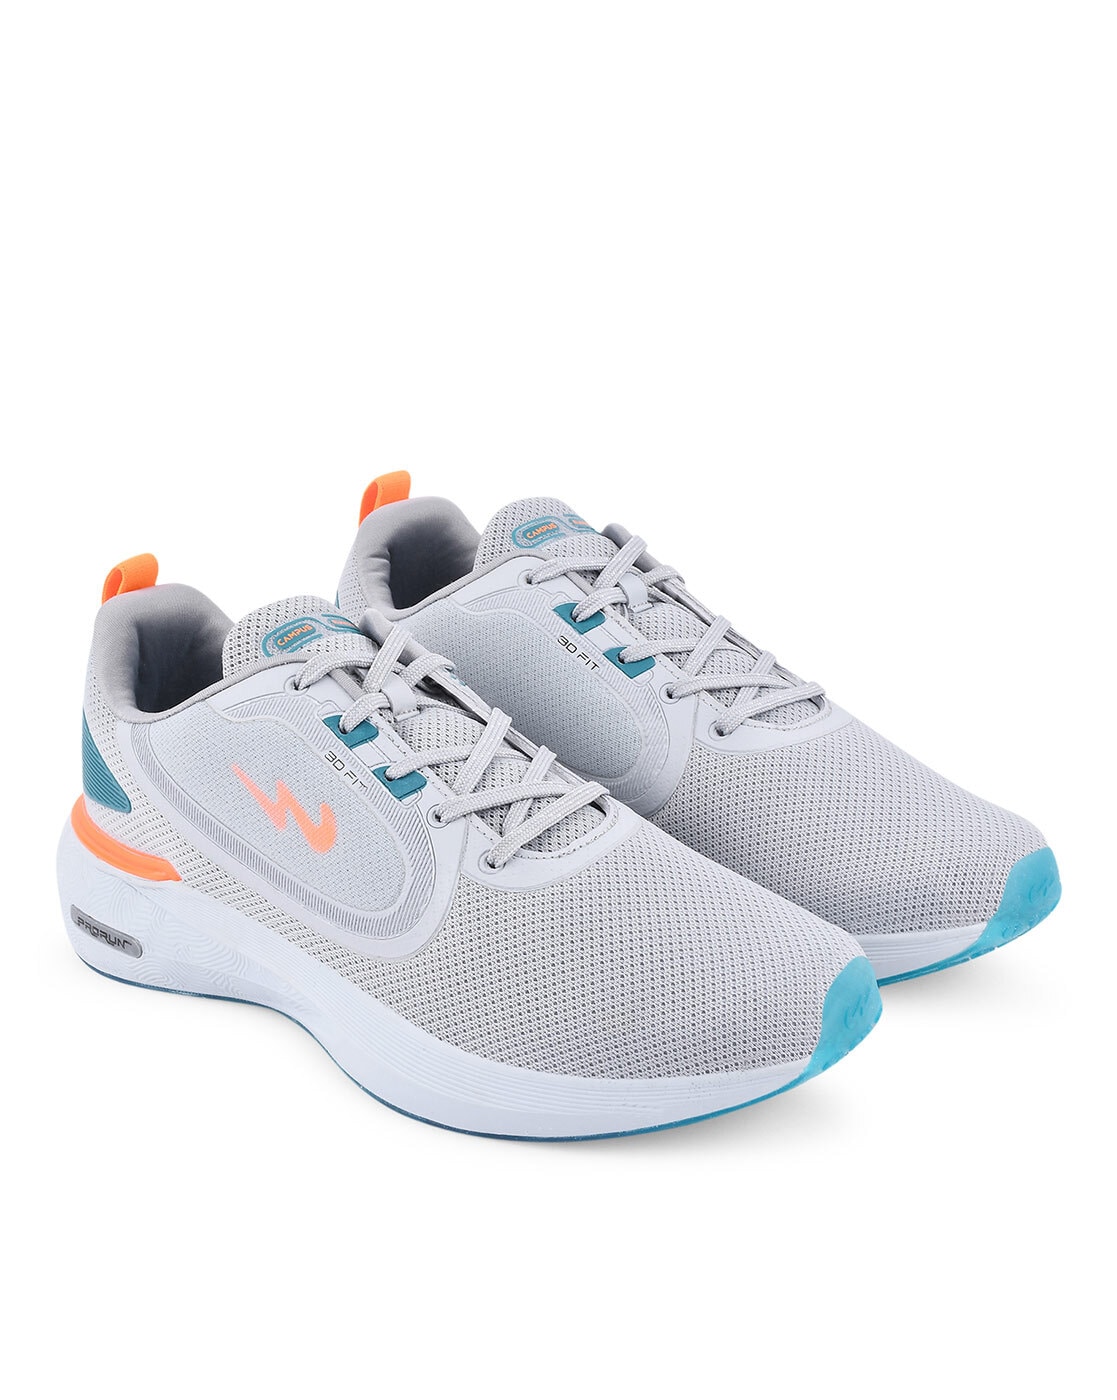 Buy A6 Sports Trending Running Shoes For Men Online @ ₹2499 from ShopClues